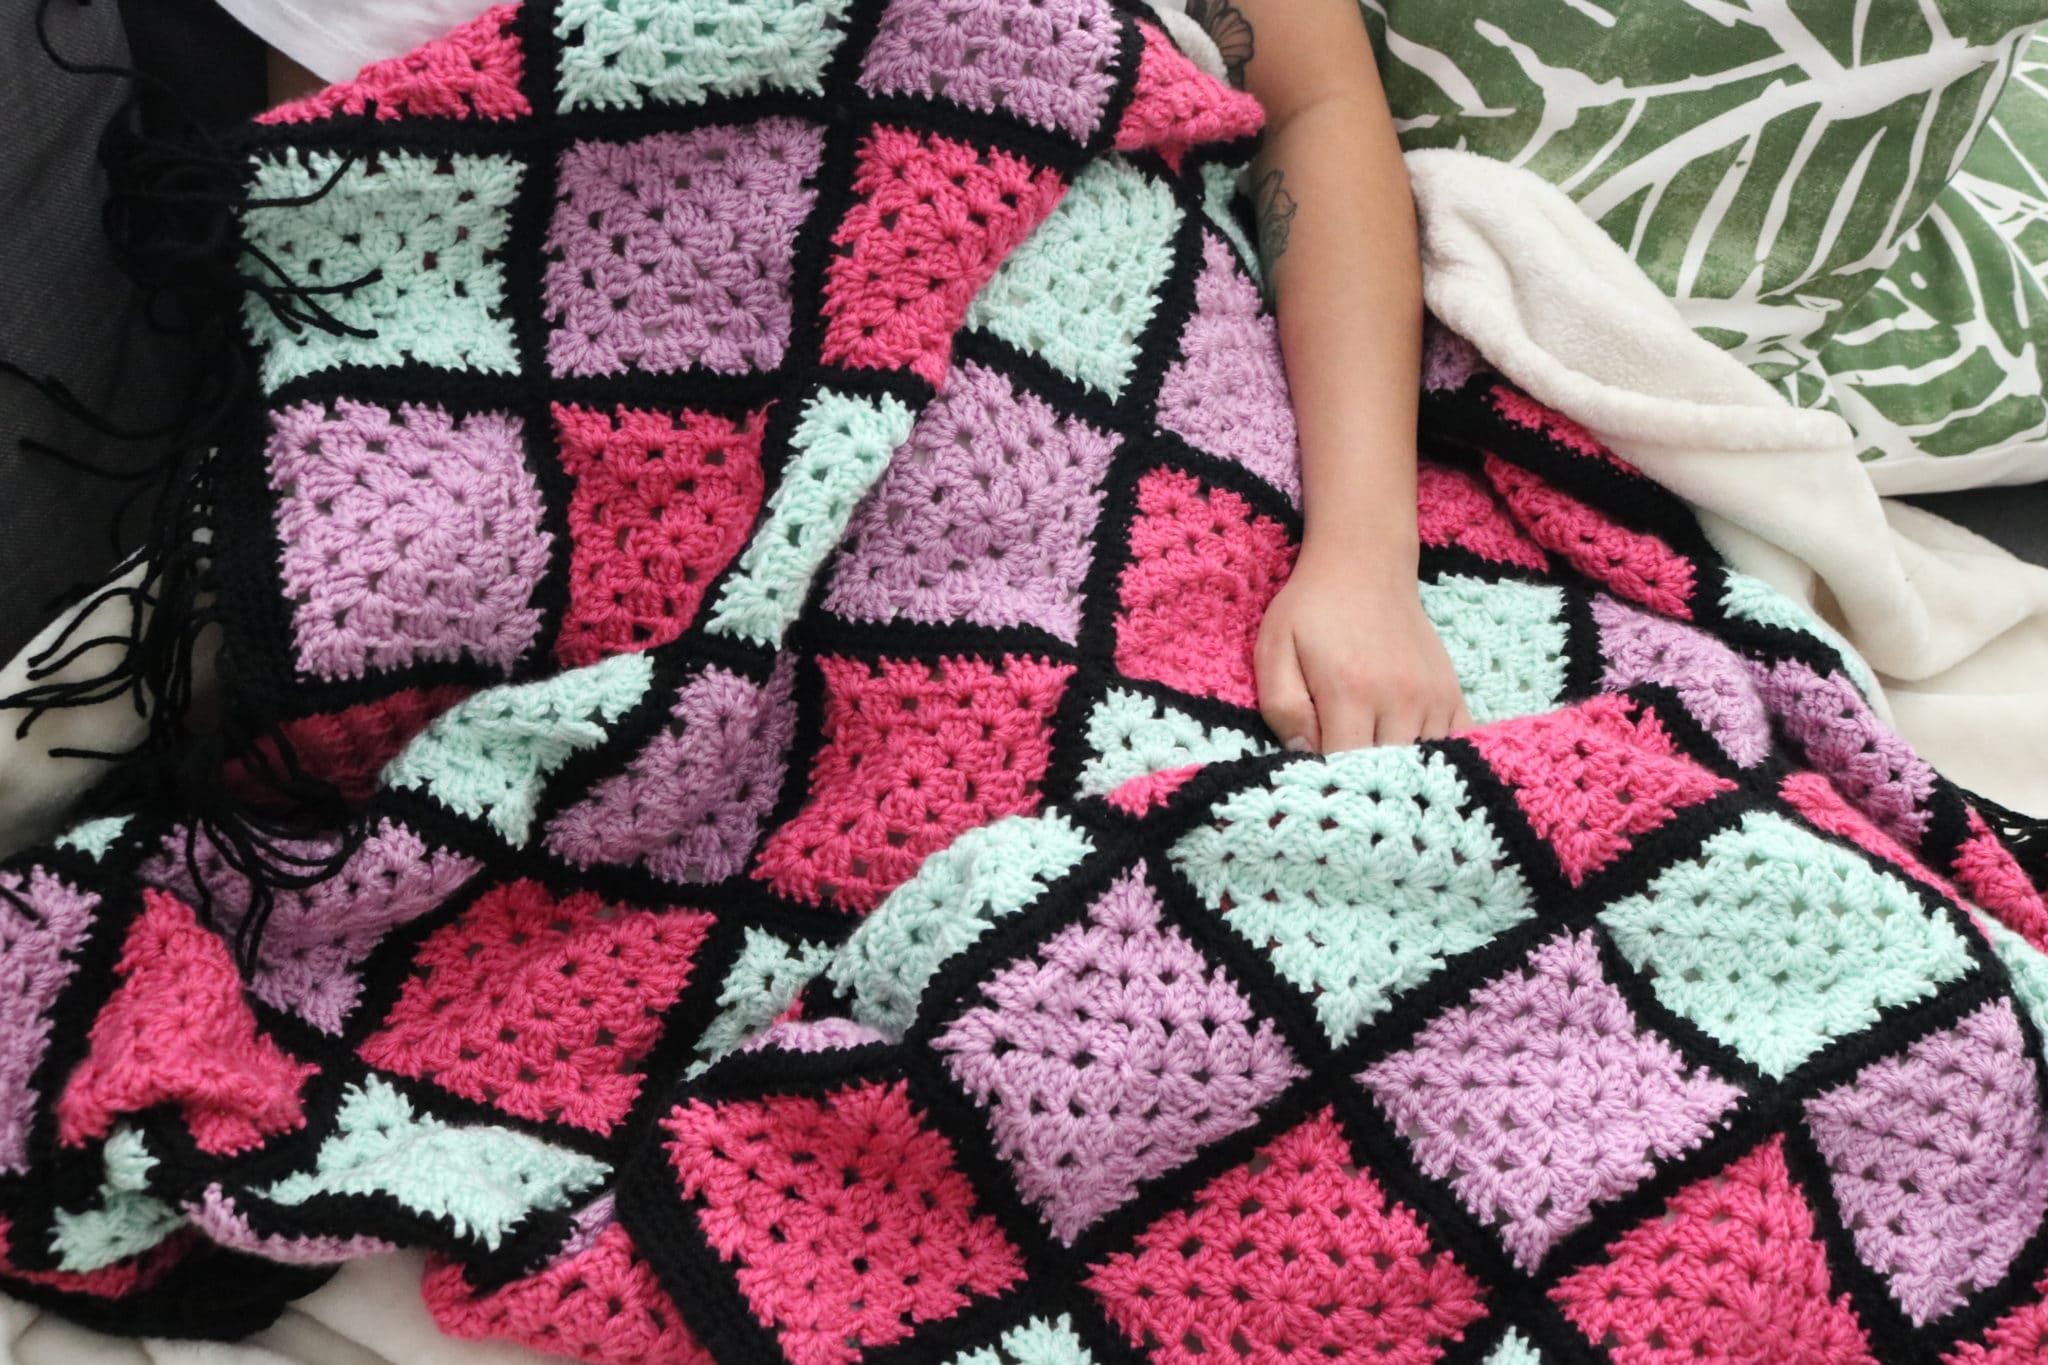 The Complete Guide for Crochet Blanket Sizes for Beginners - Knits and